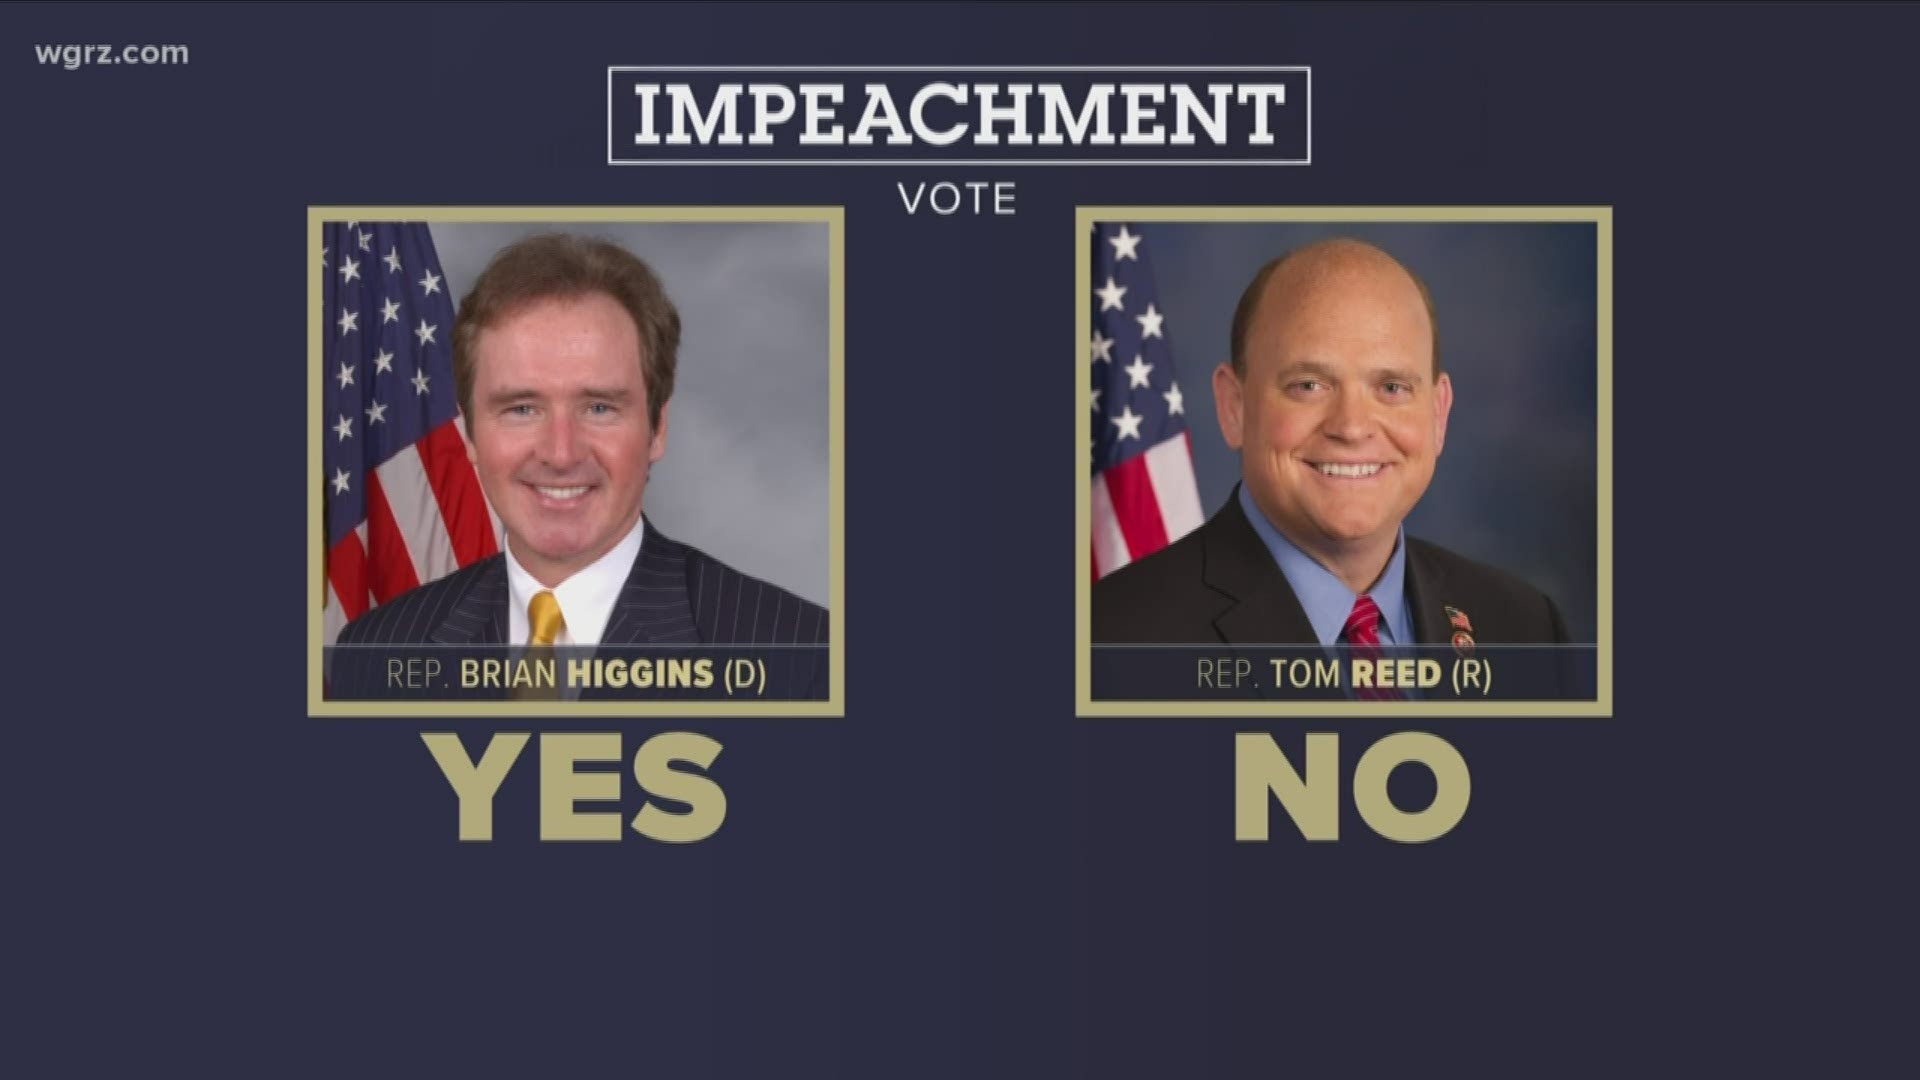 Here's how our WNY representatives voted today. Staying right along party lines, Democrat Brian Higgins voted yes to impeachment while Republican Tom Reed voted no.